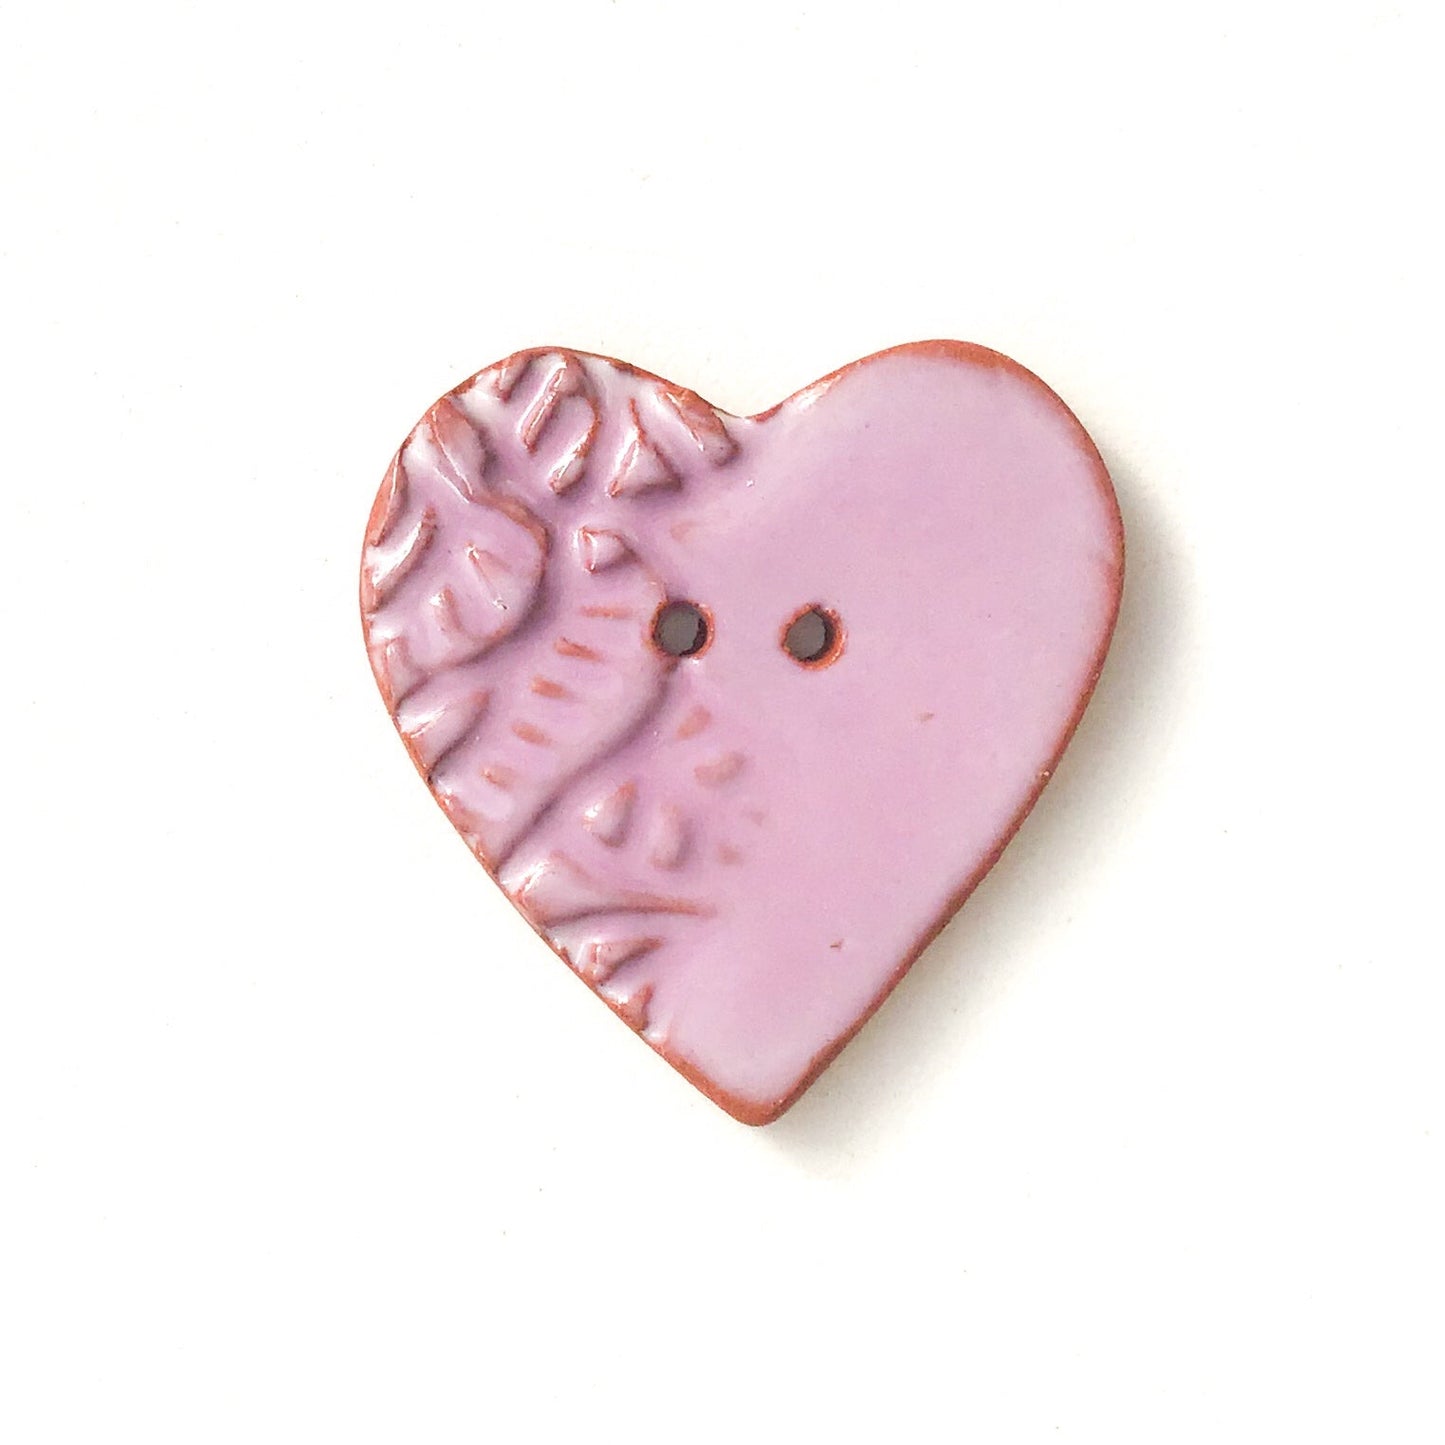 (Wholesale Accounts Only) 1 3/8" Stamped Heart - flat - red clay